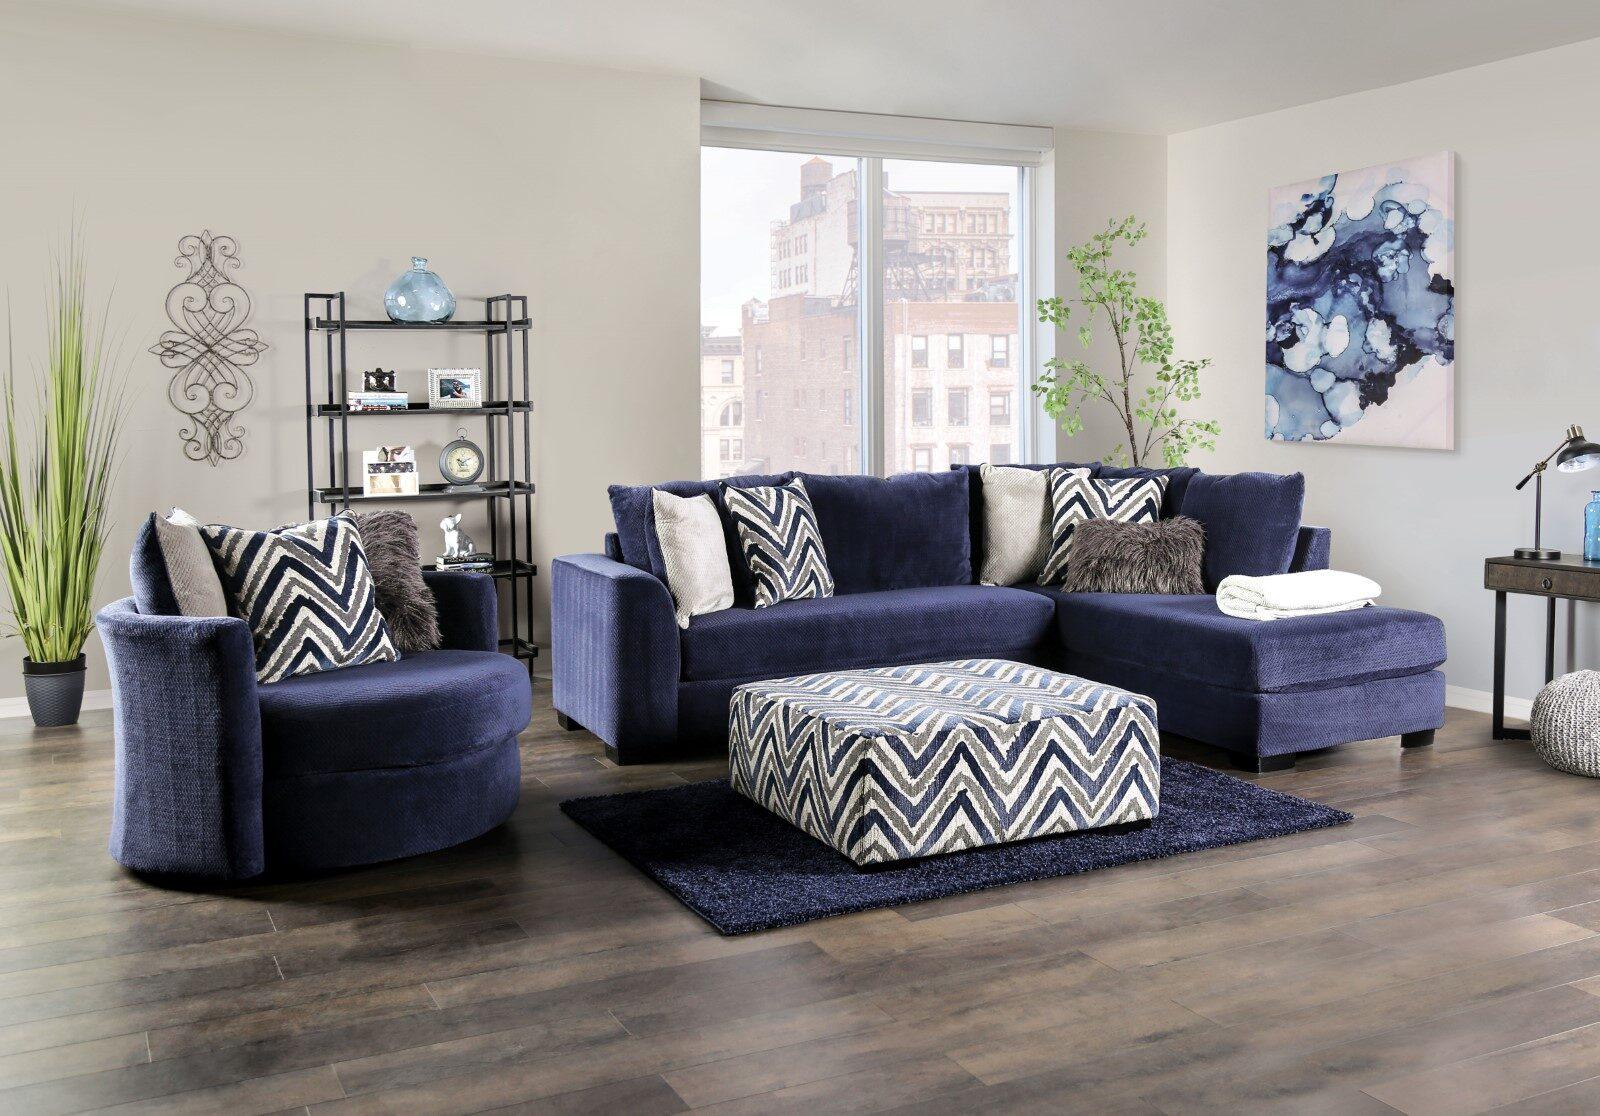 Transitional Sectional Sofa and Chair SM5151-2PC Griswold SM5151-2PC in Navy Microfiber